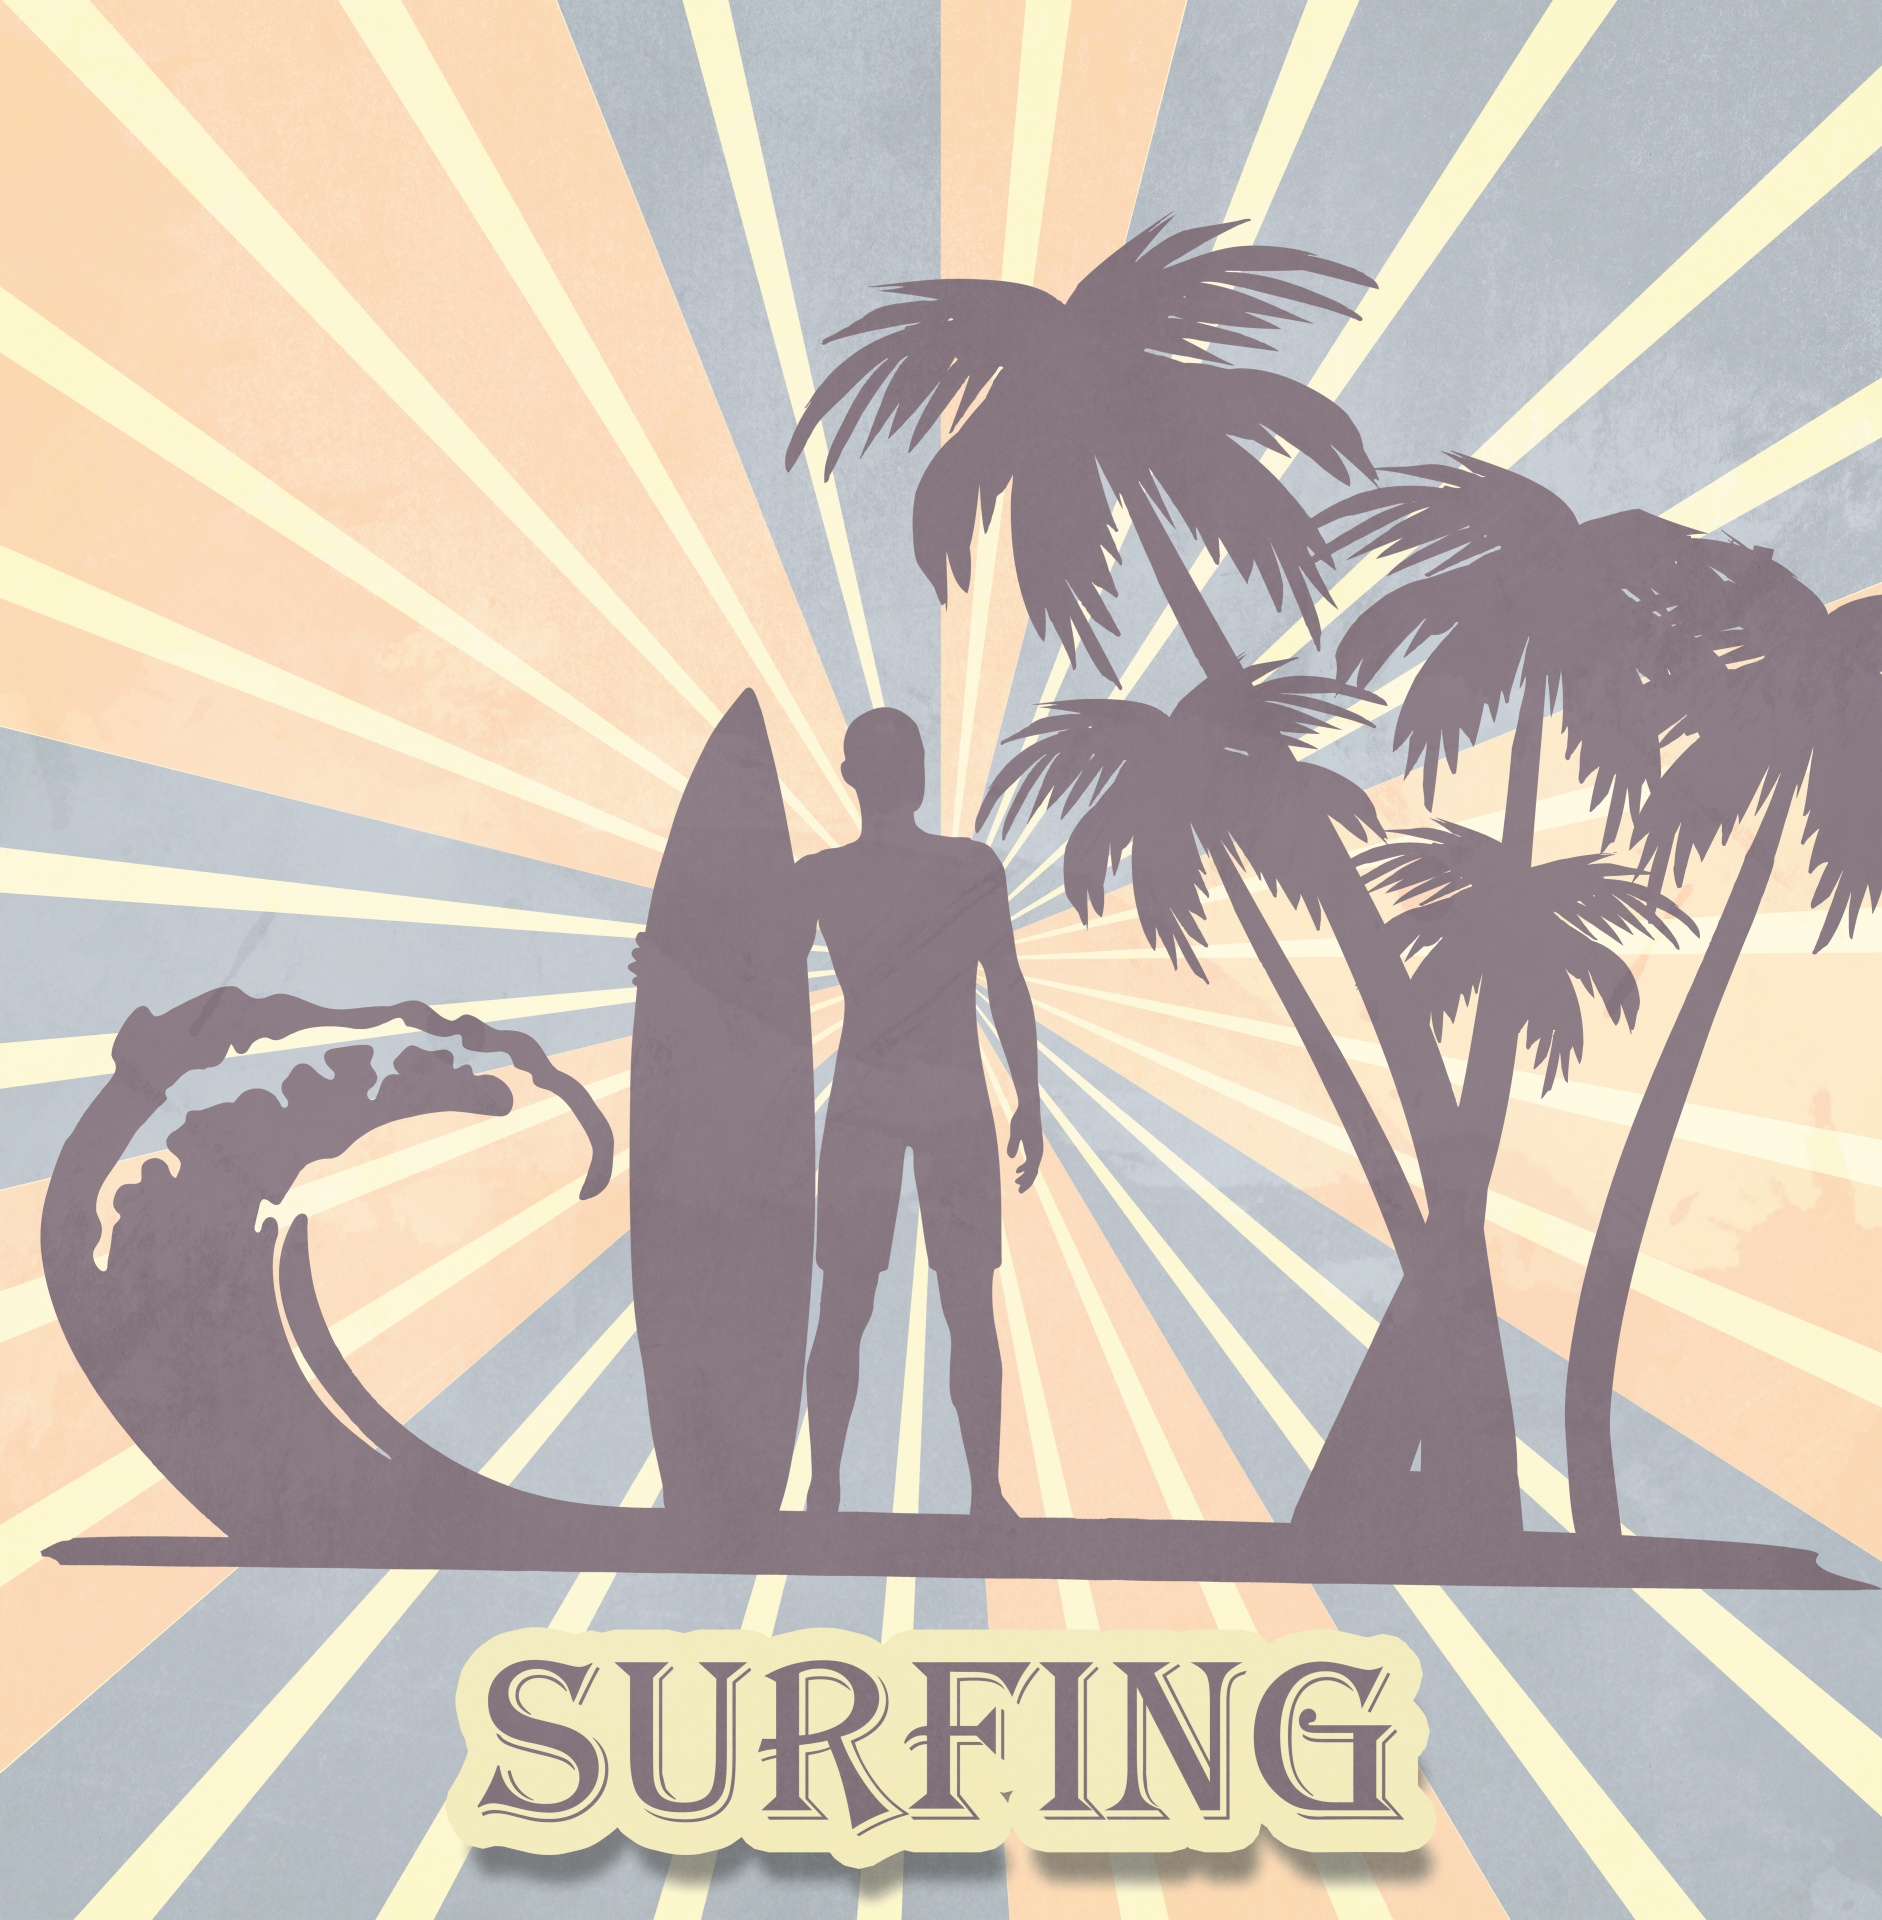 Male surfer with surfboard silhouette with palm trees and waves retro vintage background